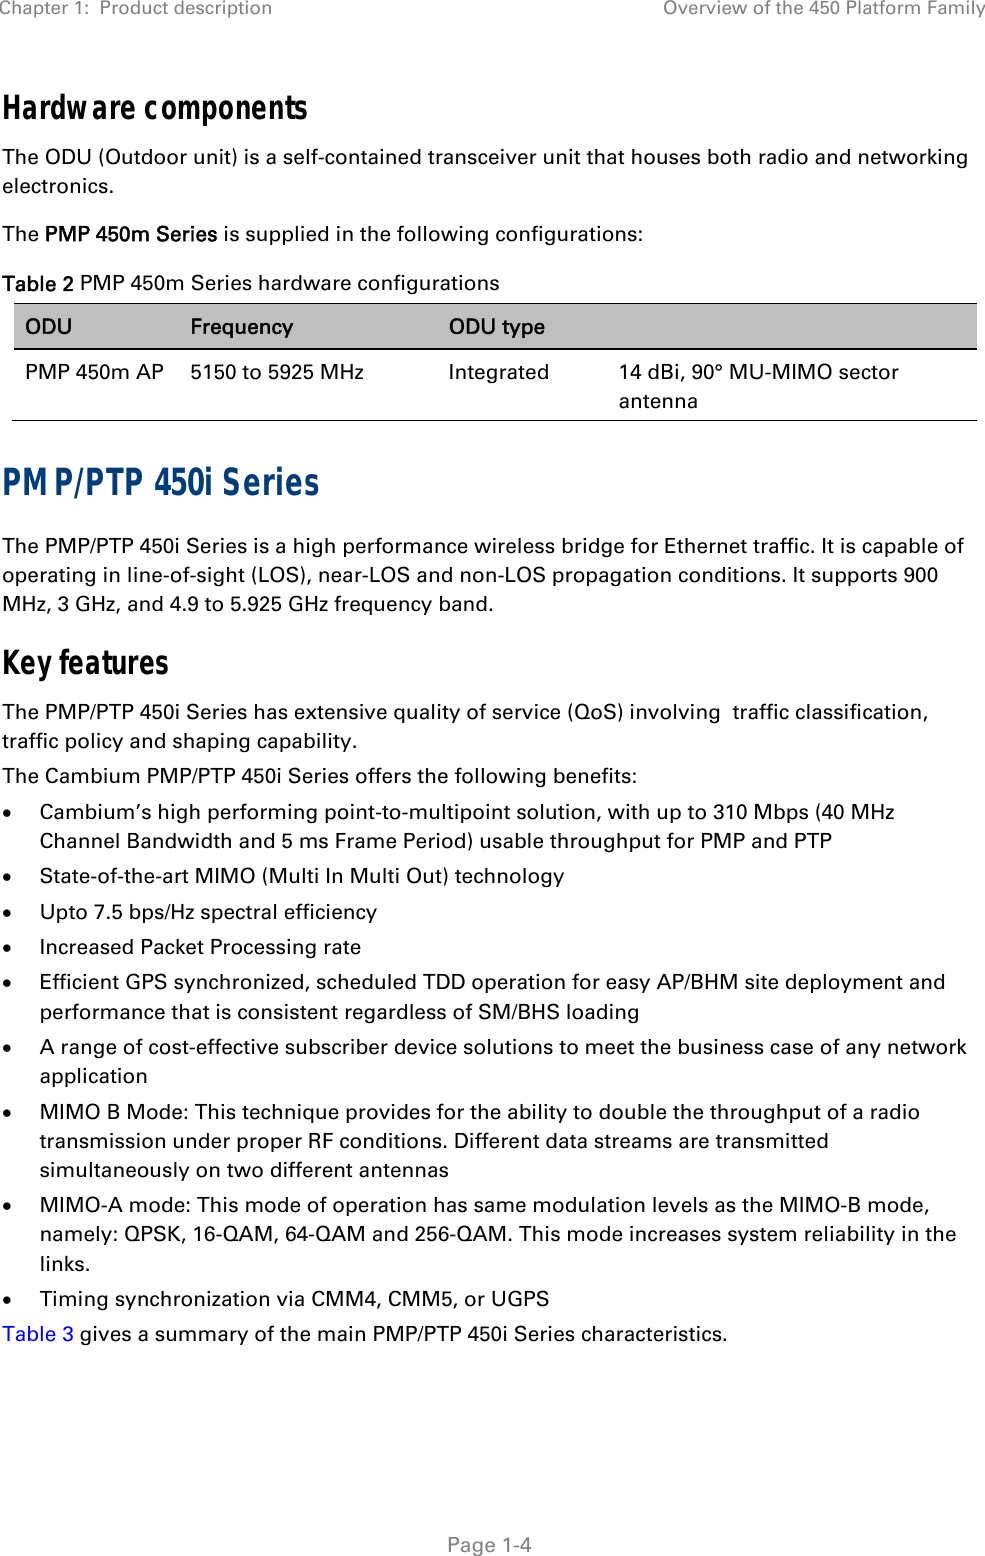 Chapter 1:  Product description  Overview of the 450 Platform Family   Page 1-4 Hardware components The ODU (Outdoor unit) is a self-contained transceiver unit that houses both radio and networking electronics.  The PMP 450m Series is supplied in the following configurations: Table 2 PMP 450m Series hardware configurations ODU  Frequency  ODU type   PMP 450m AP  5150 to 5925 MHz  Integrated  14 dBi, 90° MU-MIMO sector antenna PMP/PTP 450i Series The PMP/PTP 450i Series is a high performance wireless bridge for Ethernet traffic. It is capable of operating in line-of-sight (LOS), near-LOS and non-LOS propagation conditions. It supports 900 MHz, 3 GHz, and 4.9 to 5.925 GHz frequency band. Key features The PMP/PTP 450i Series has extensive quality of service (QoS) involving  traffic classification, traffic policy and shaping capability.  The Cambium PMP/PTP 450i Series offers the following benefits:  Cambium’s high performing point-to-multipoint solution, with up to 310 Mbps (40 MHz Channel Bandwidth and 5 ms Frame Period) usable throughput for PMP and PTP  State-of-the-art MIMO (Multi In Multi Out) technology  Upto 7.5 bps/Hz spectral efficiency  Increased Packet Processing rate  Efficient GPS synchronized, scheduled TDD operation for easy AP/BHM site deployment and performance that is consistent regardless of SM/BHS loading  A range of cost-effective subscriber device solutions to meet the business case of any network application  MIMO B Mode: This technique provides for the ability to double the throughput of a radio transmission under proper RF conditions. Different data streams are transmitted simultaneously on two different antennas  MIMO-A mode: This mode of operation has same modulation levels as the MIMO-B mode, namely: QPSK, 16-QAM, 64-QAM and 256-QAM. This mode increases system reliability in the links.  Timing synchronization via CMM4, CMM5, or UGPS Table 3 gives a summary of the main PMP/PTP 450i Series characteristics. 